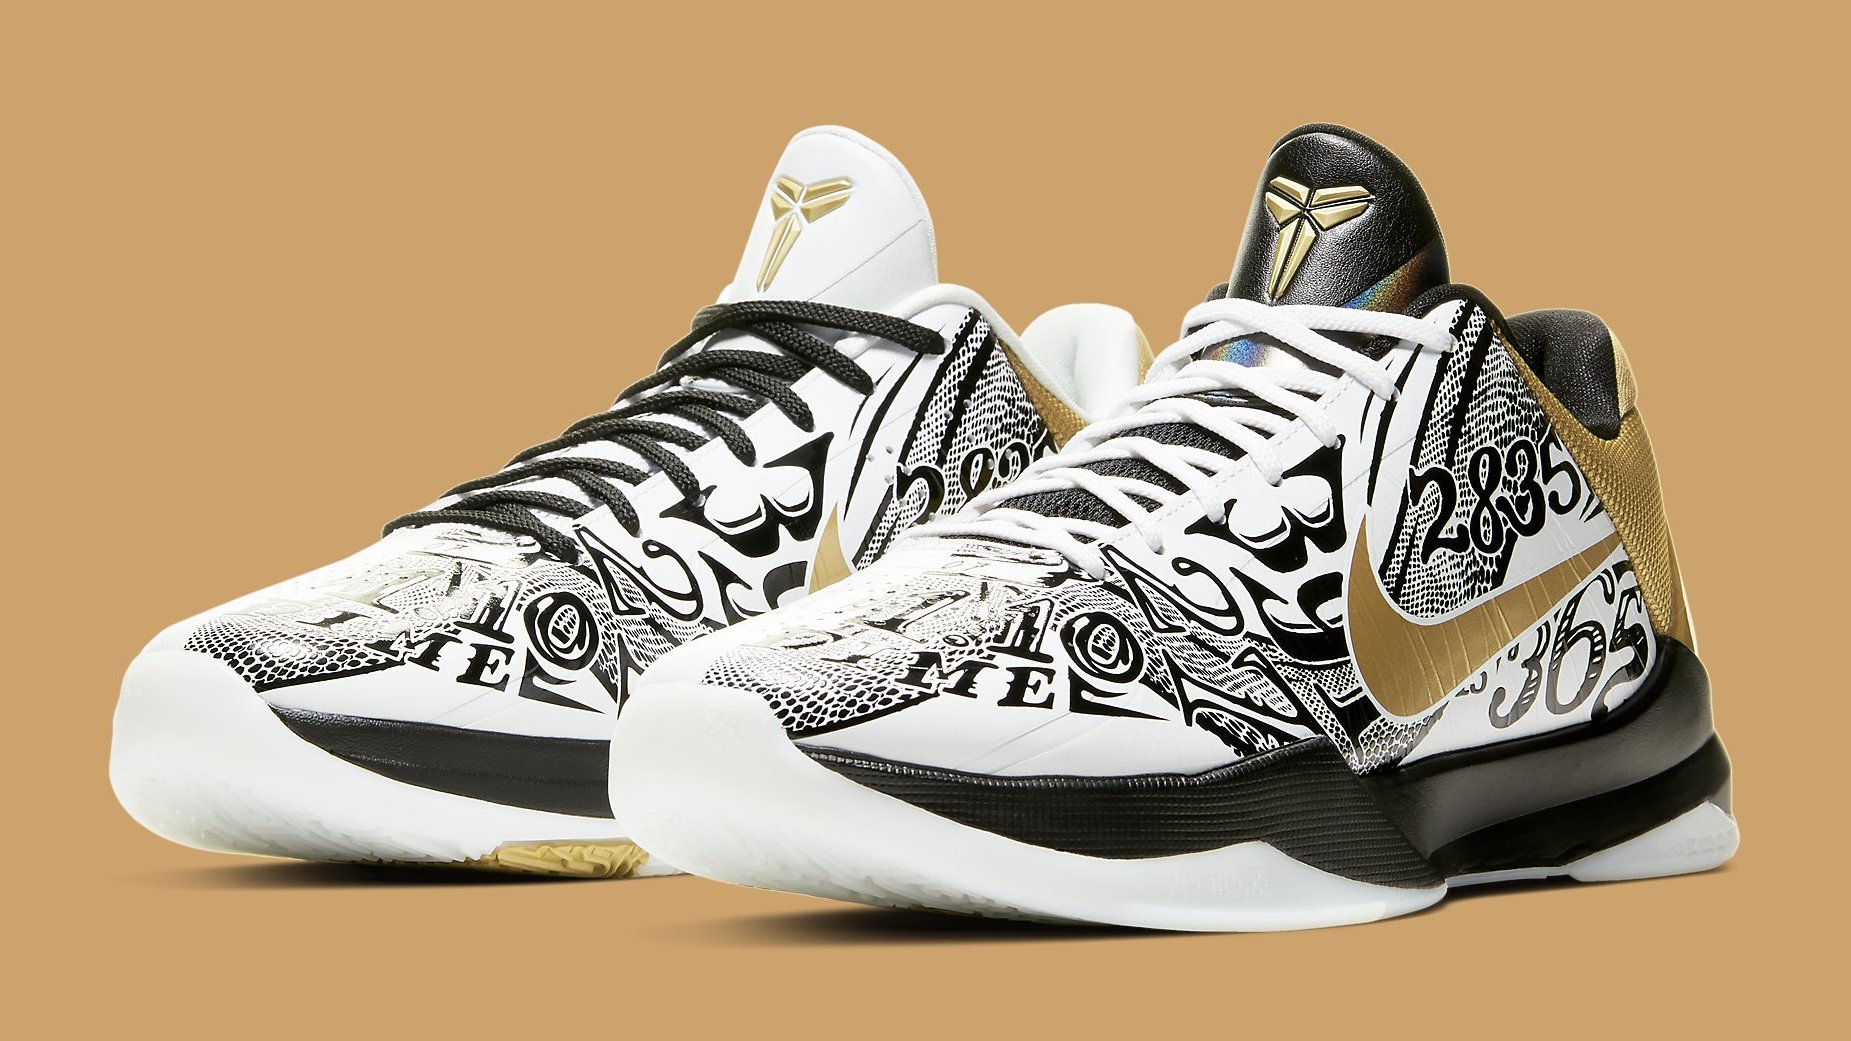 kobe limited edition shoes